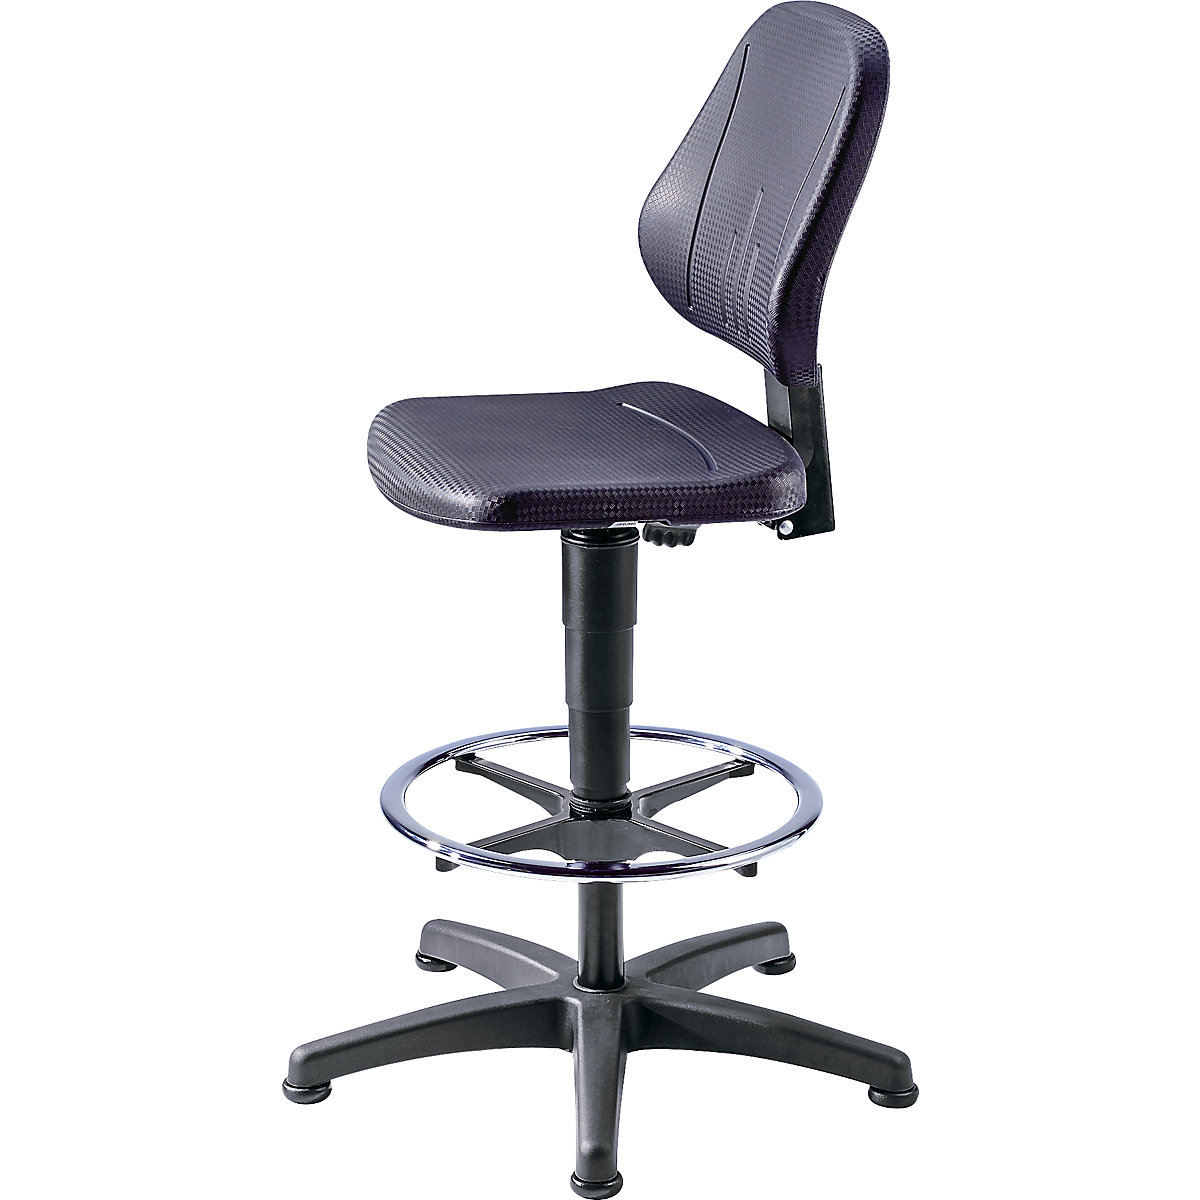 Industrial swivel chair – bimos, with gas lift height adjustment, PU foam, black, with floor glides and foot ring-15